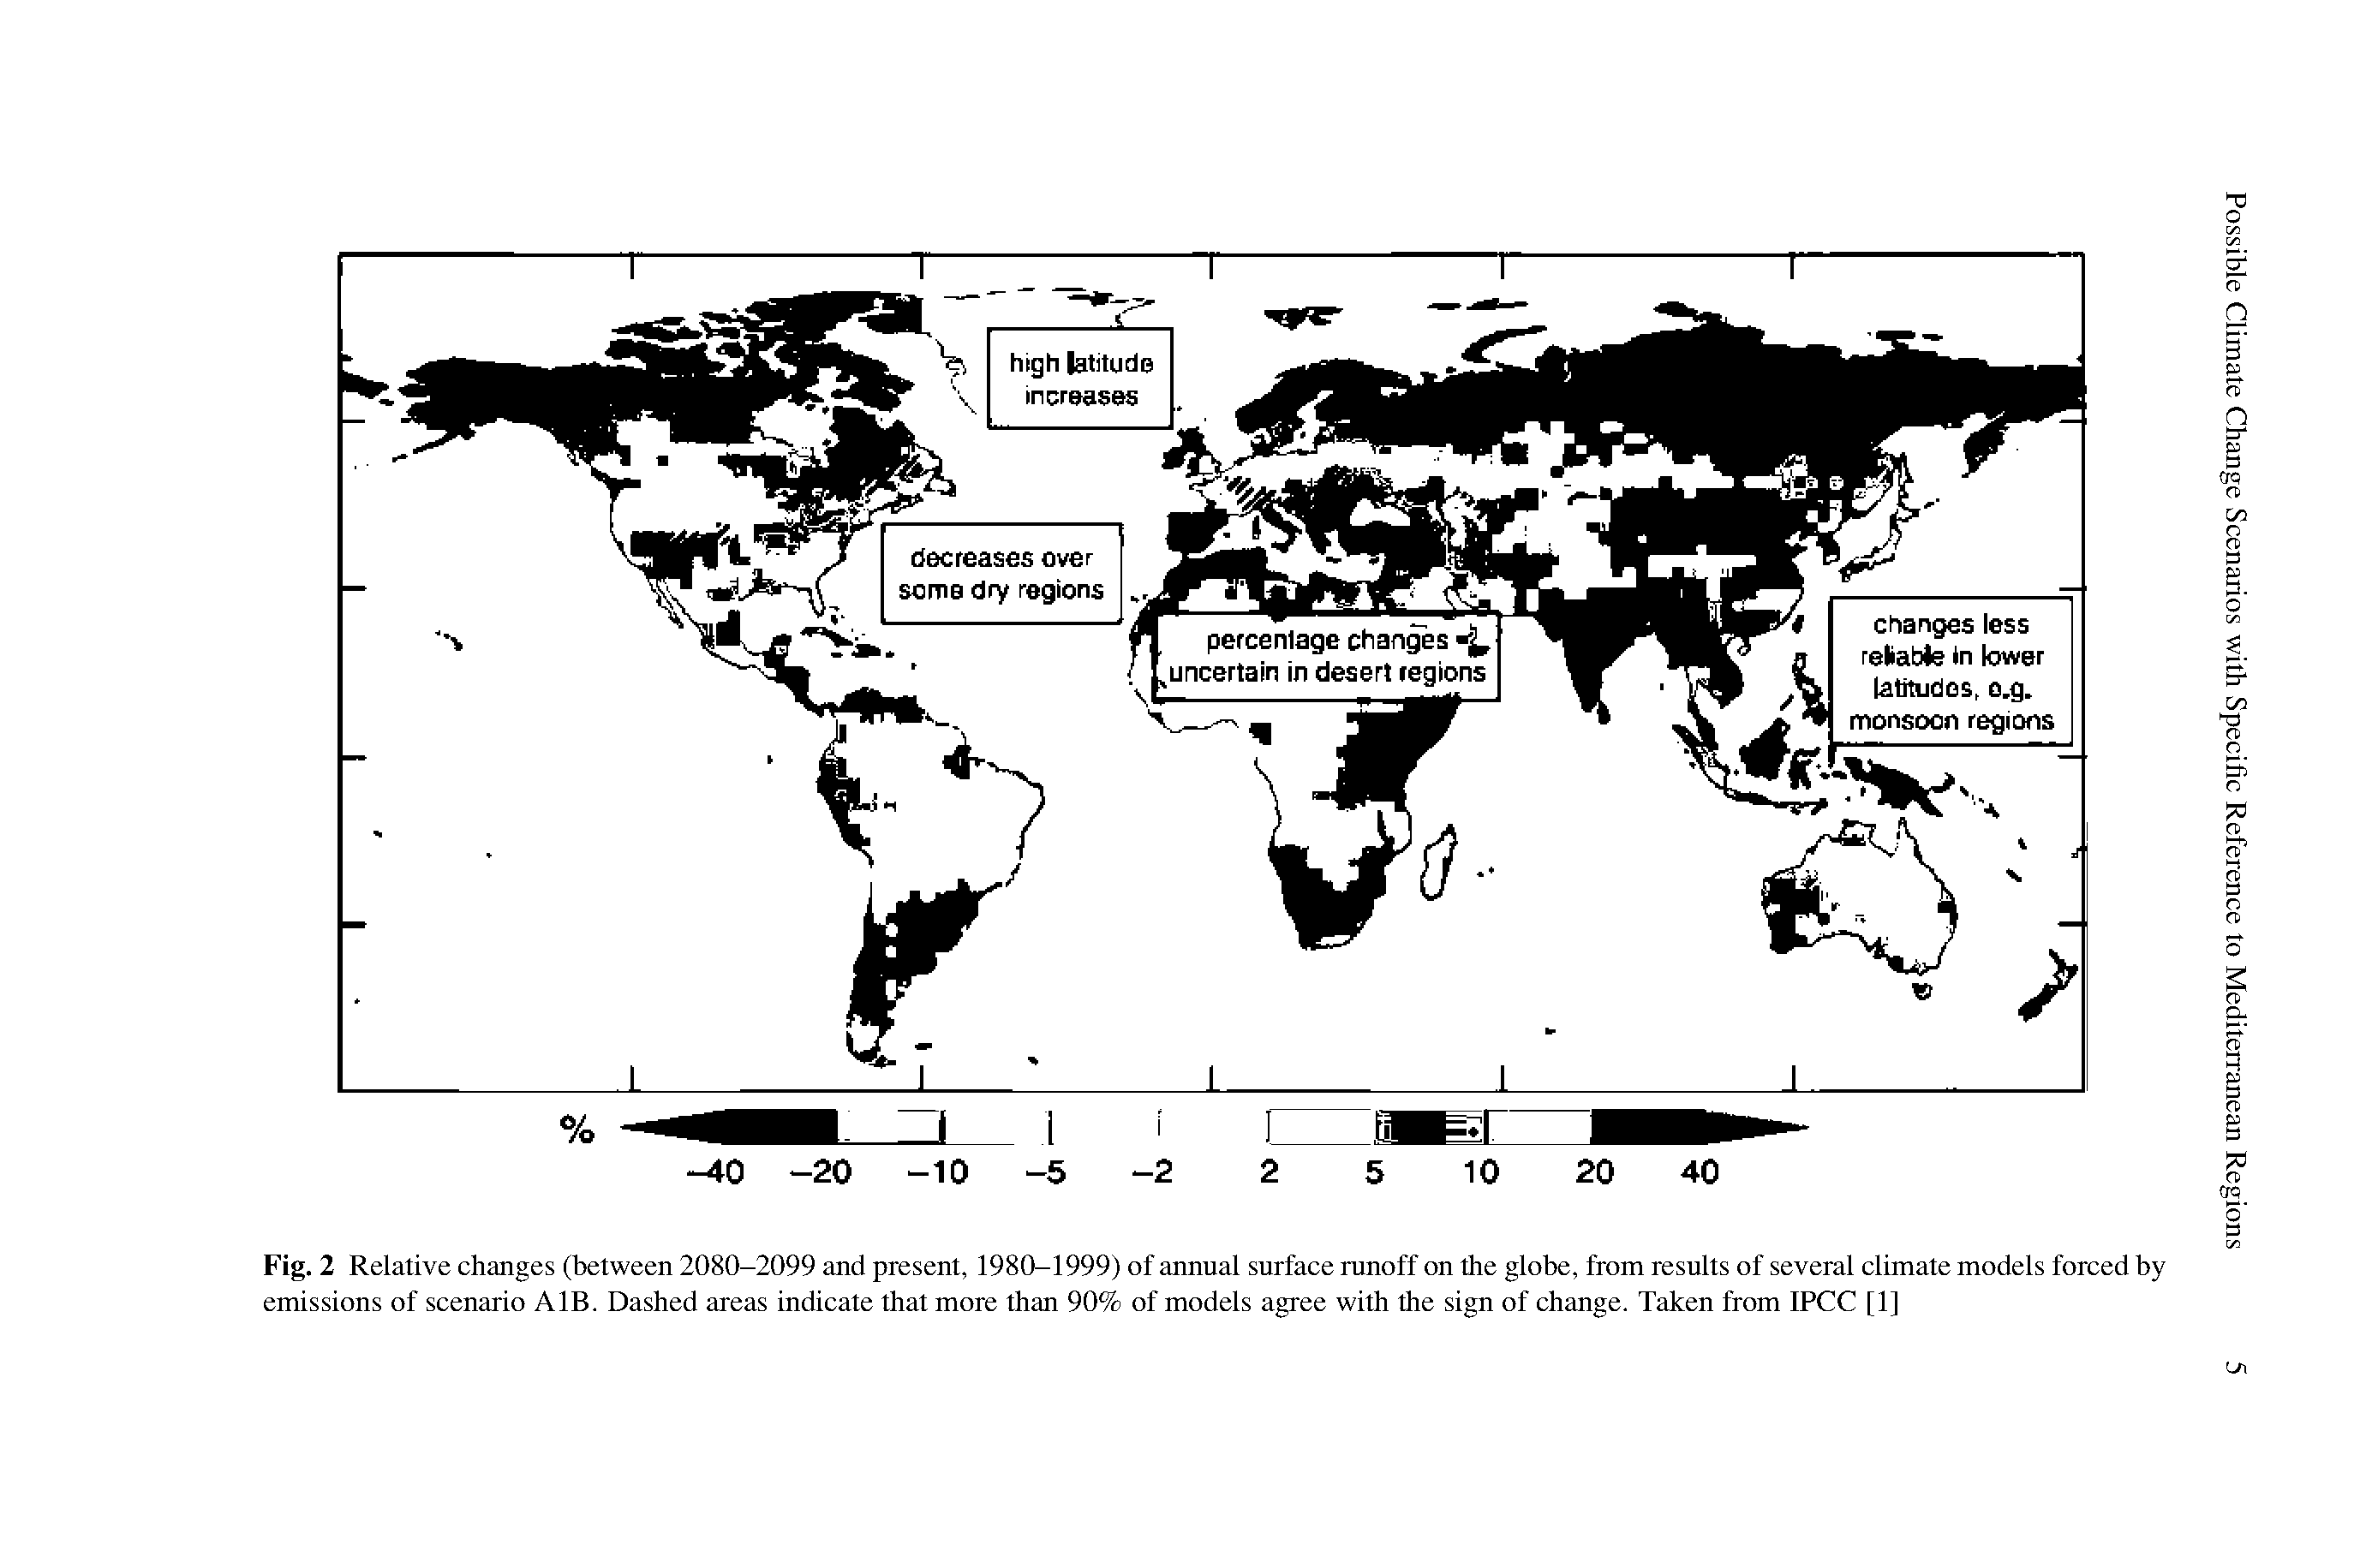 Fig. 2 Relative changes (between 2080-2099 and present, 1980-1999) of annual surface runoff on the globe, from results of several climate models forced by emissions of scenario AIB. Dashed areas indicate that more than 90% of models agree with the sign of change. Taken from IPCC [1]...